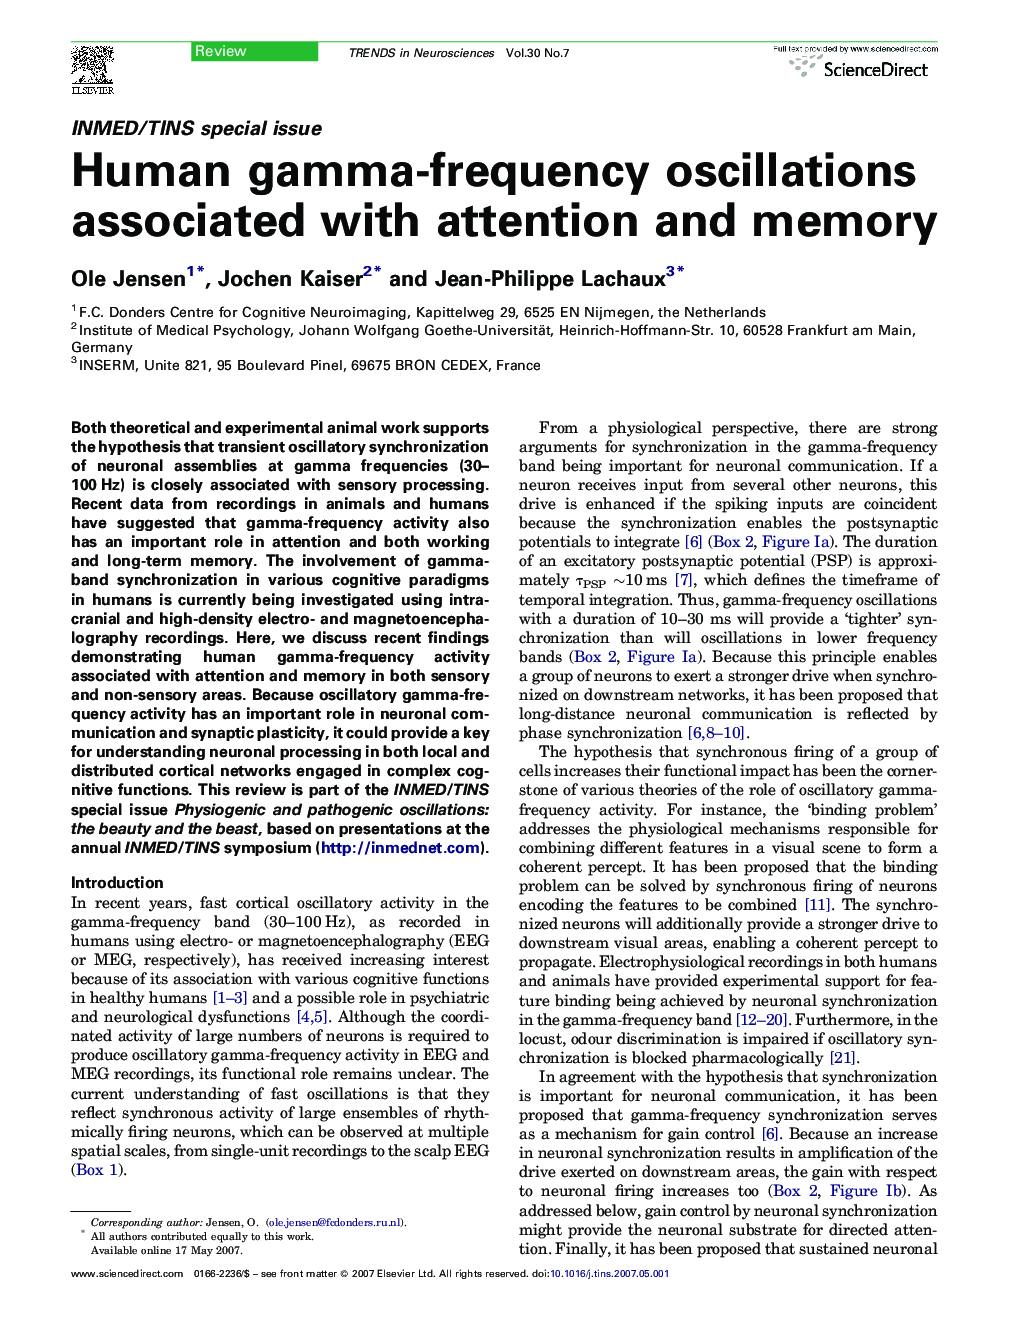 Human gamma-frequency oscillations associated with attention and memory